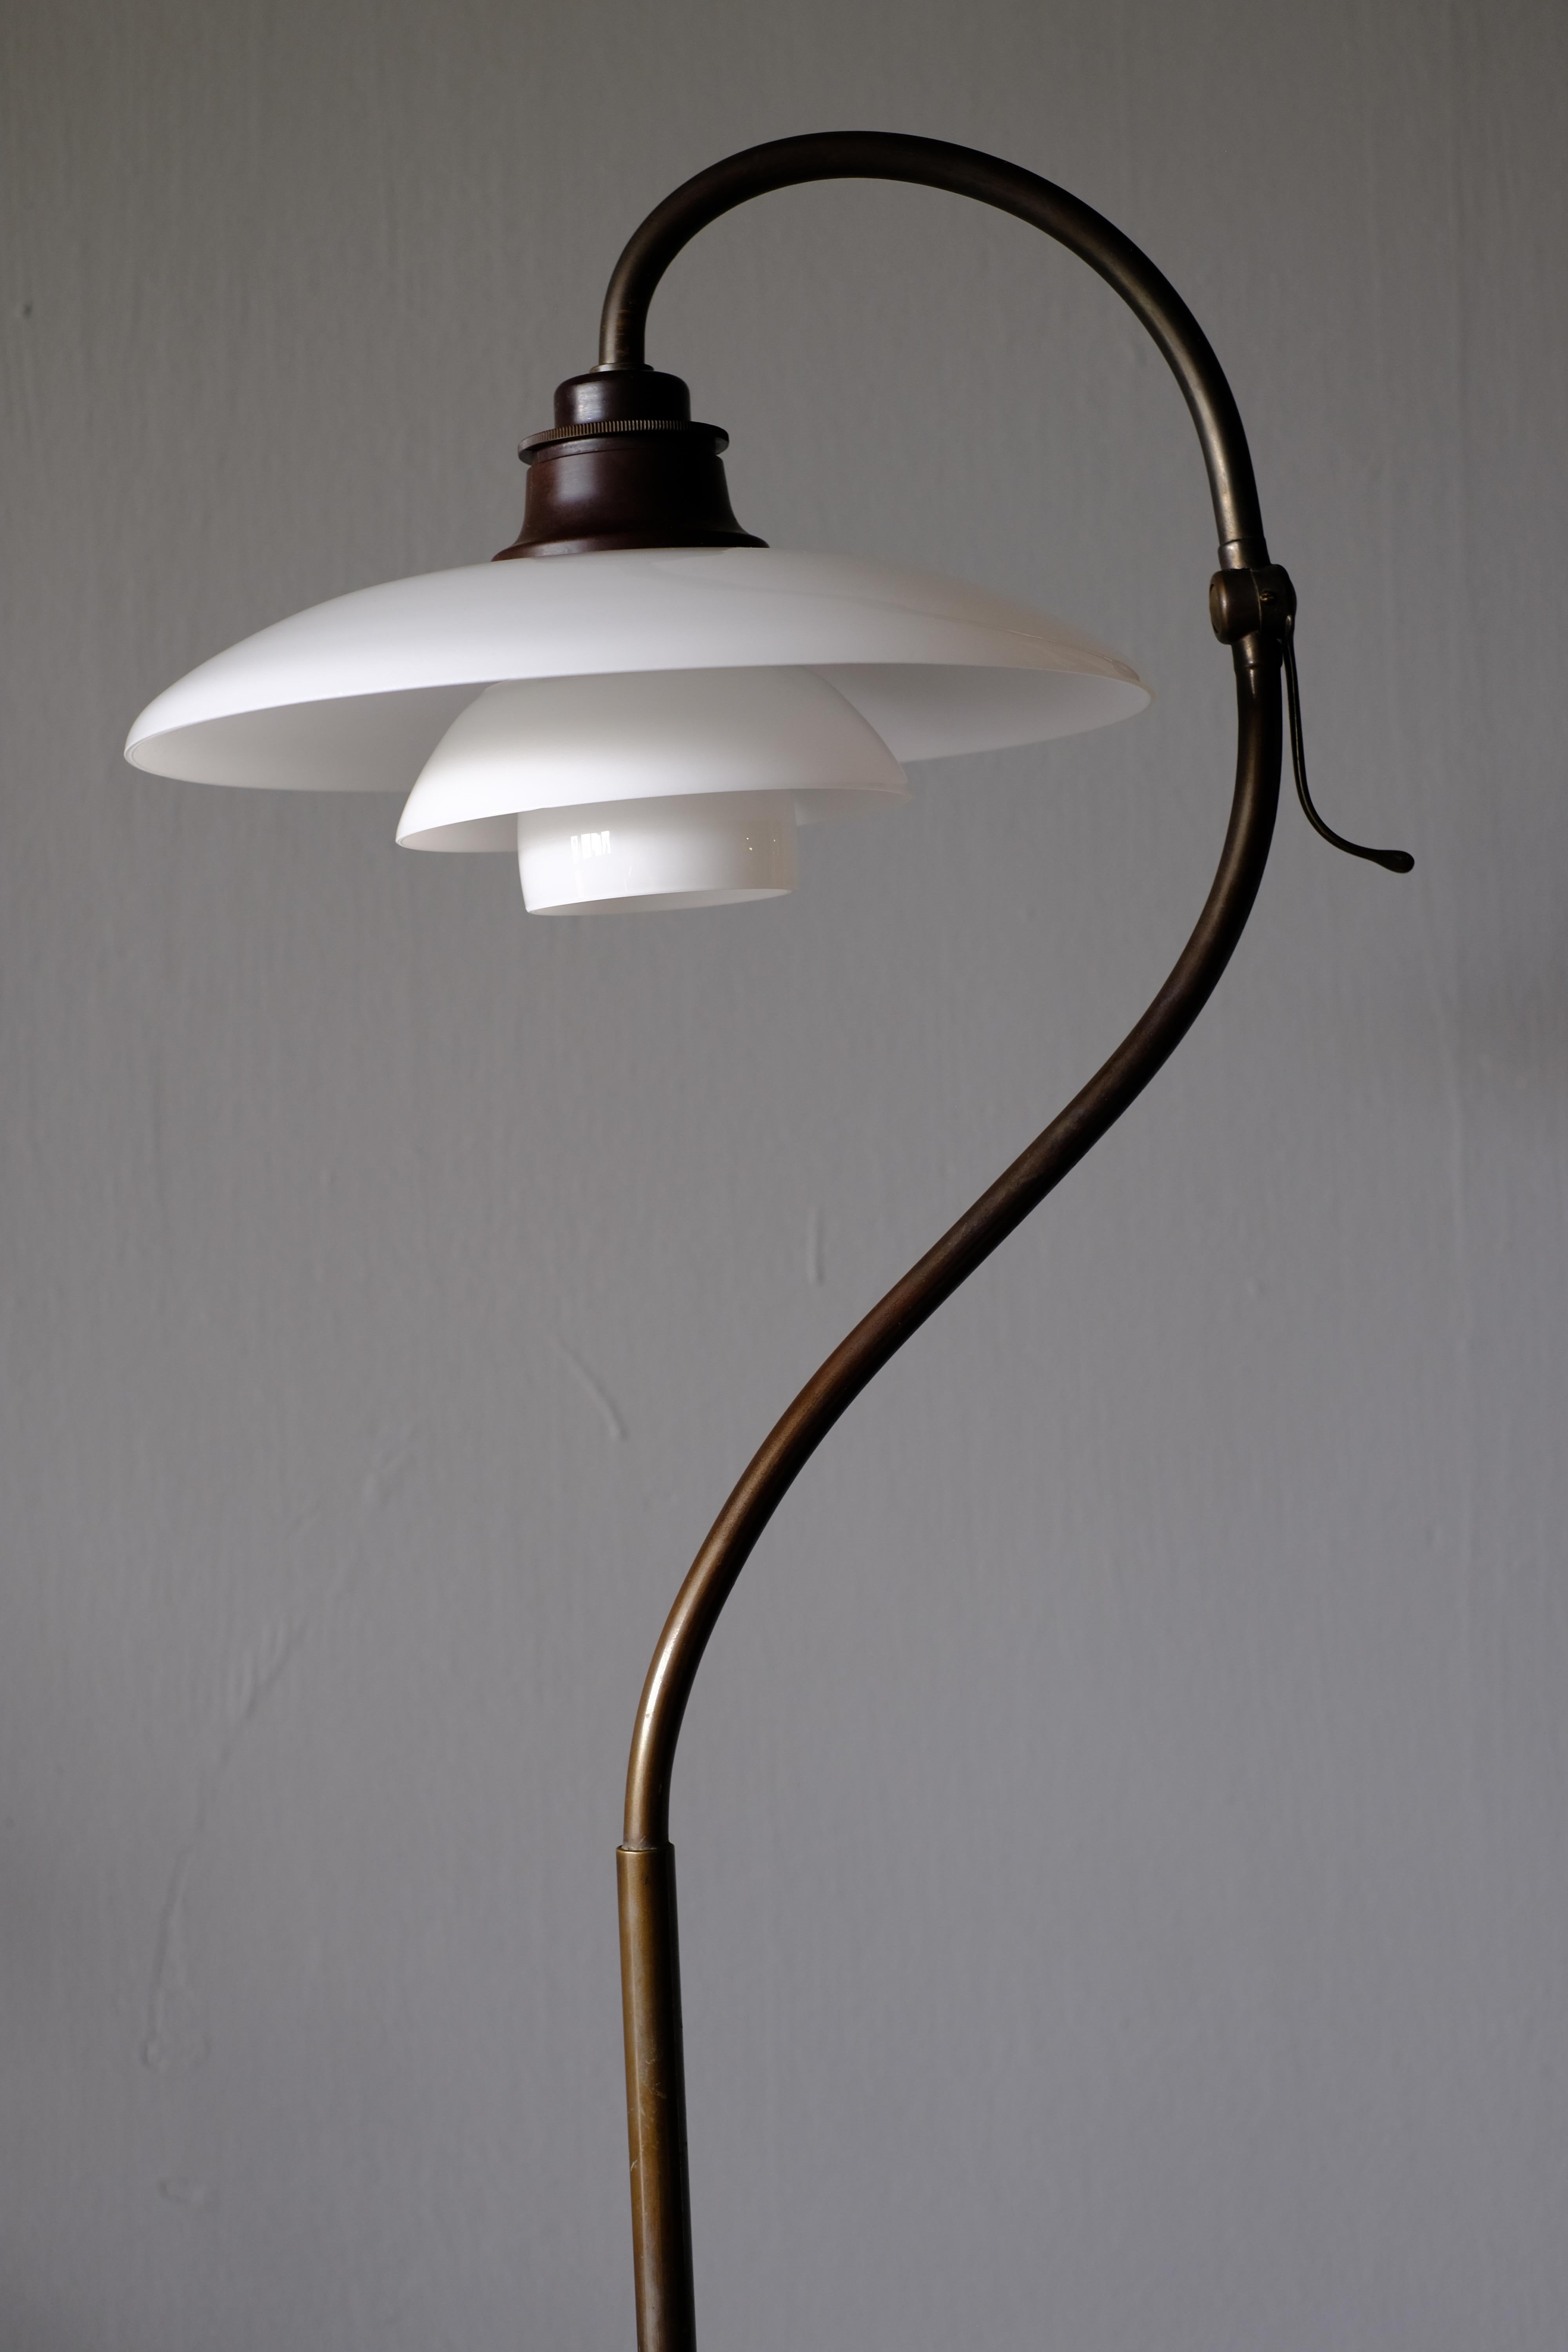 Very rare 'The Question Mark'. Standard lamp designed by Poul Henninsen for Louis Poulson. It has a browned brass socket cover and stem, painted iron foot, top with tilt function and wire shade holders with 3/2 two-layer glass shade set. This glare